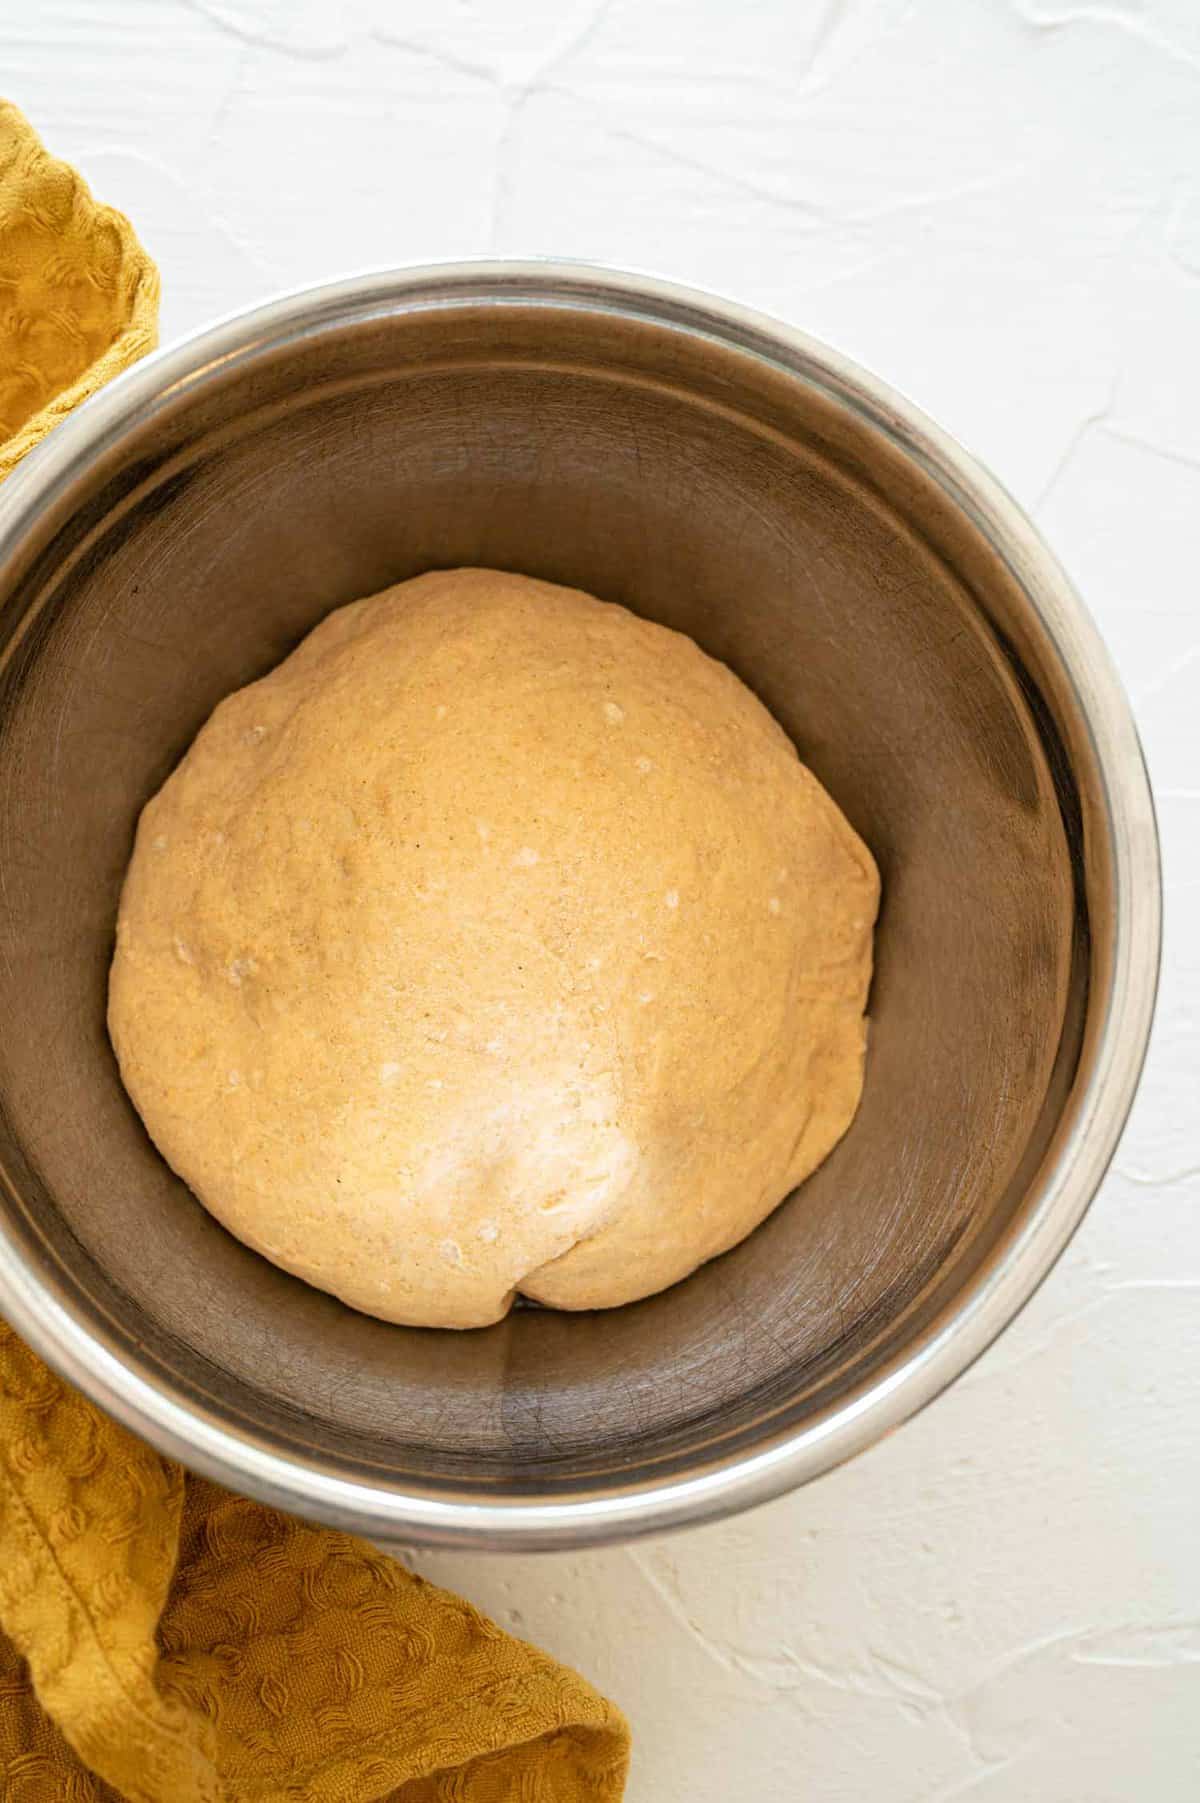 a calzone or pizza dough ball that has risen in a bowl